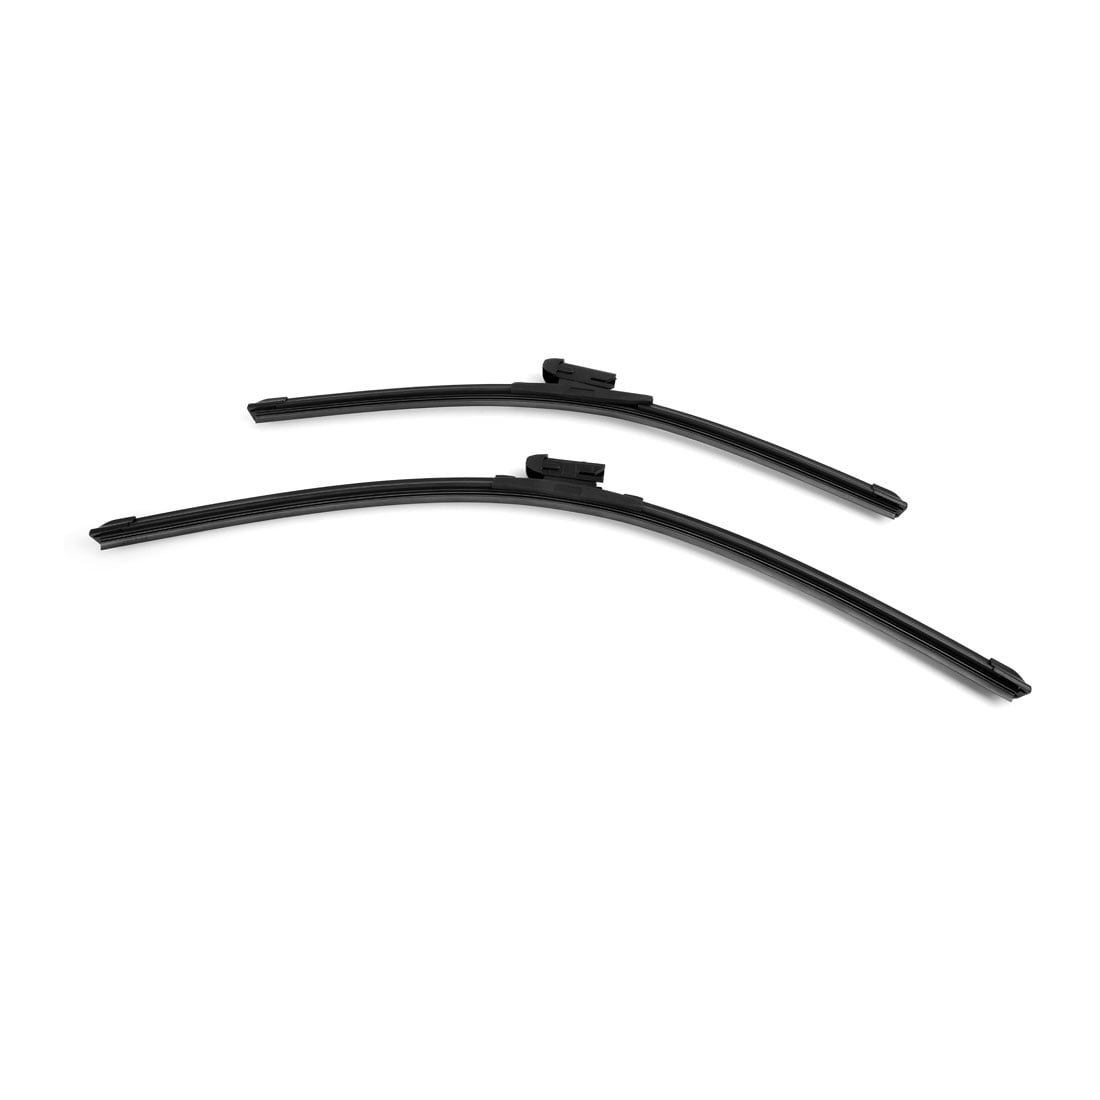 24"+18" Front Windshield Wiper Blades for 2017-18 Mazda CX-5 CX-9 - Walmart.com - Walmart.com 2017 Mazda Cx 5 Windshield Wiper Replacement